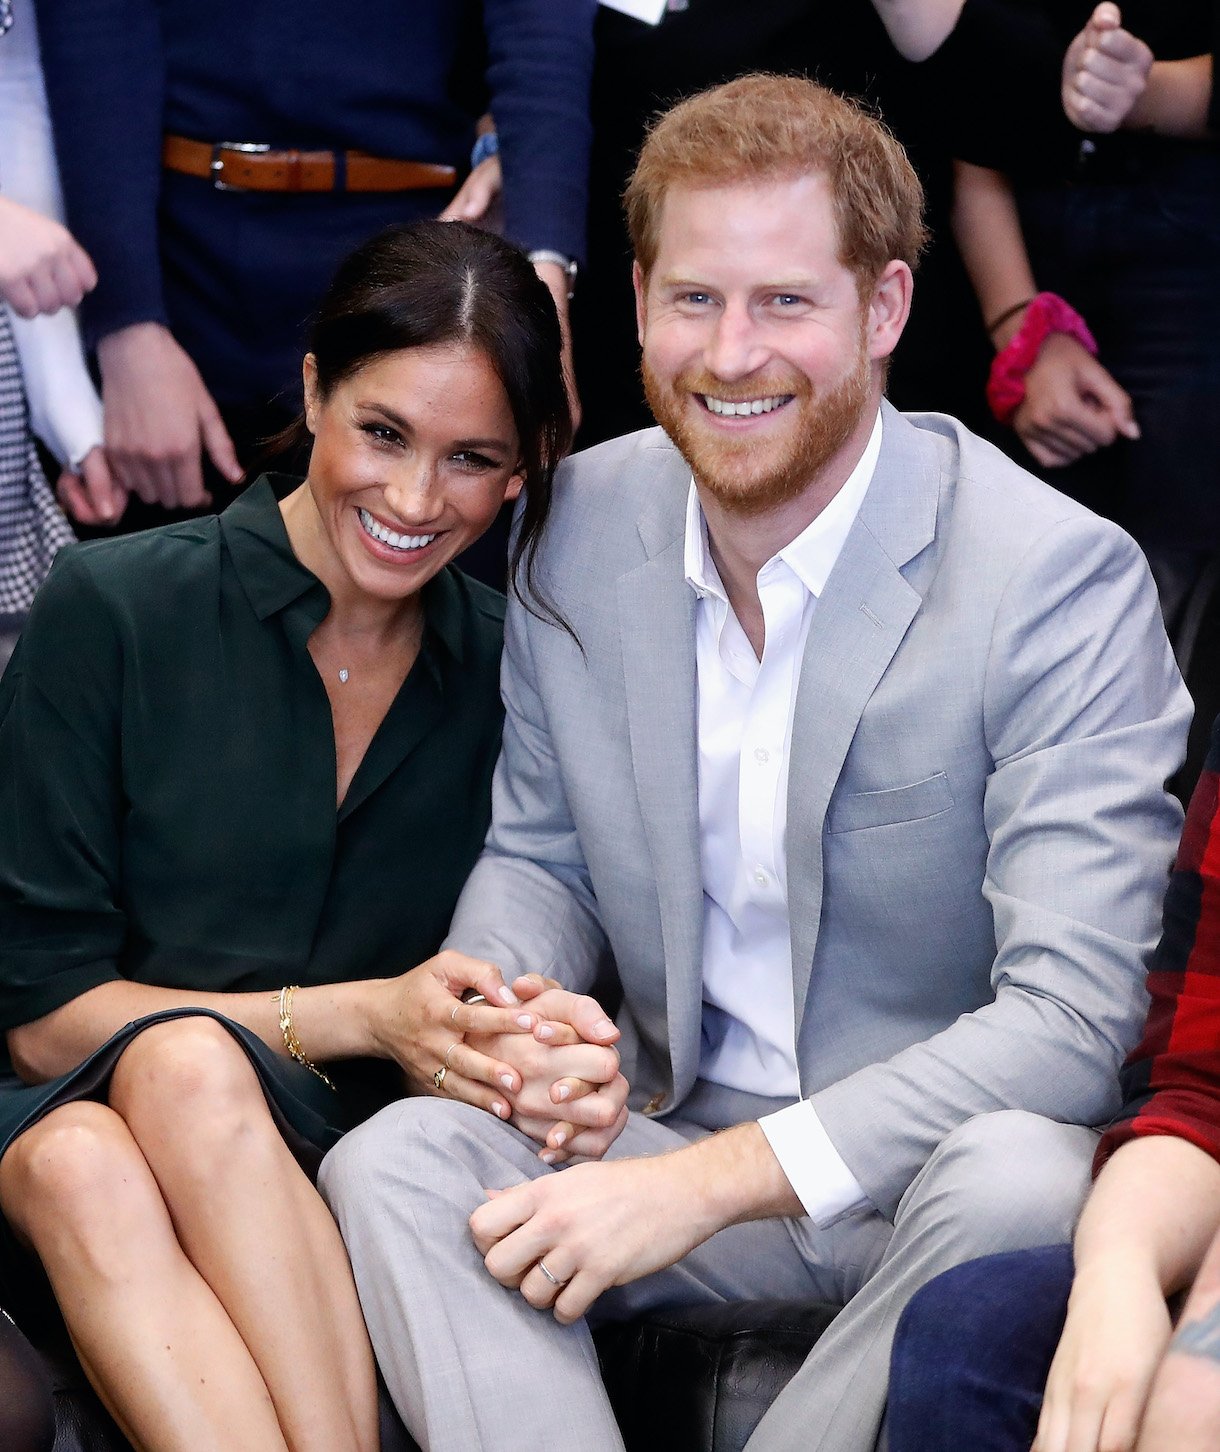 Meghan, Duchess of Sussex and Prince Harry, Duke of Sussex smail